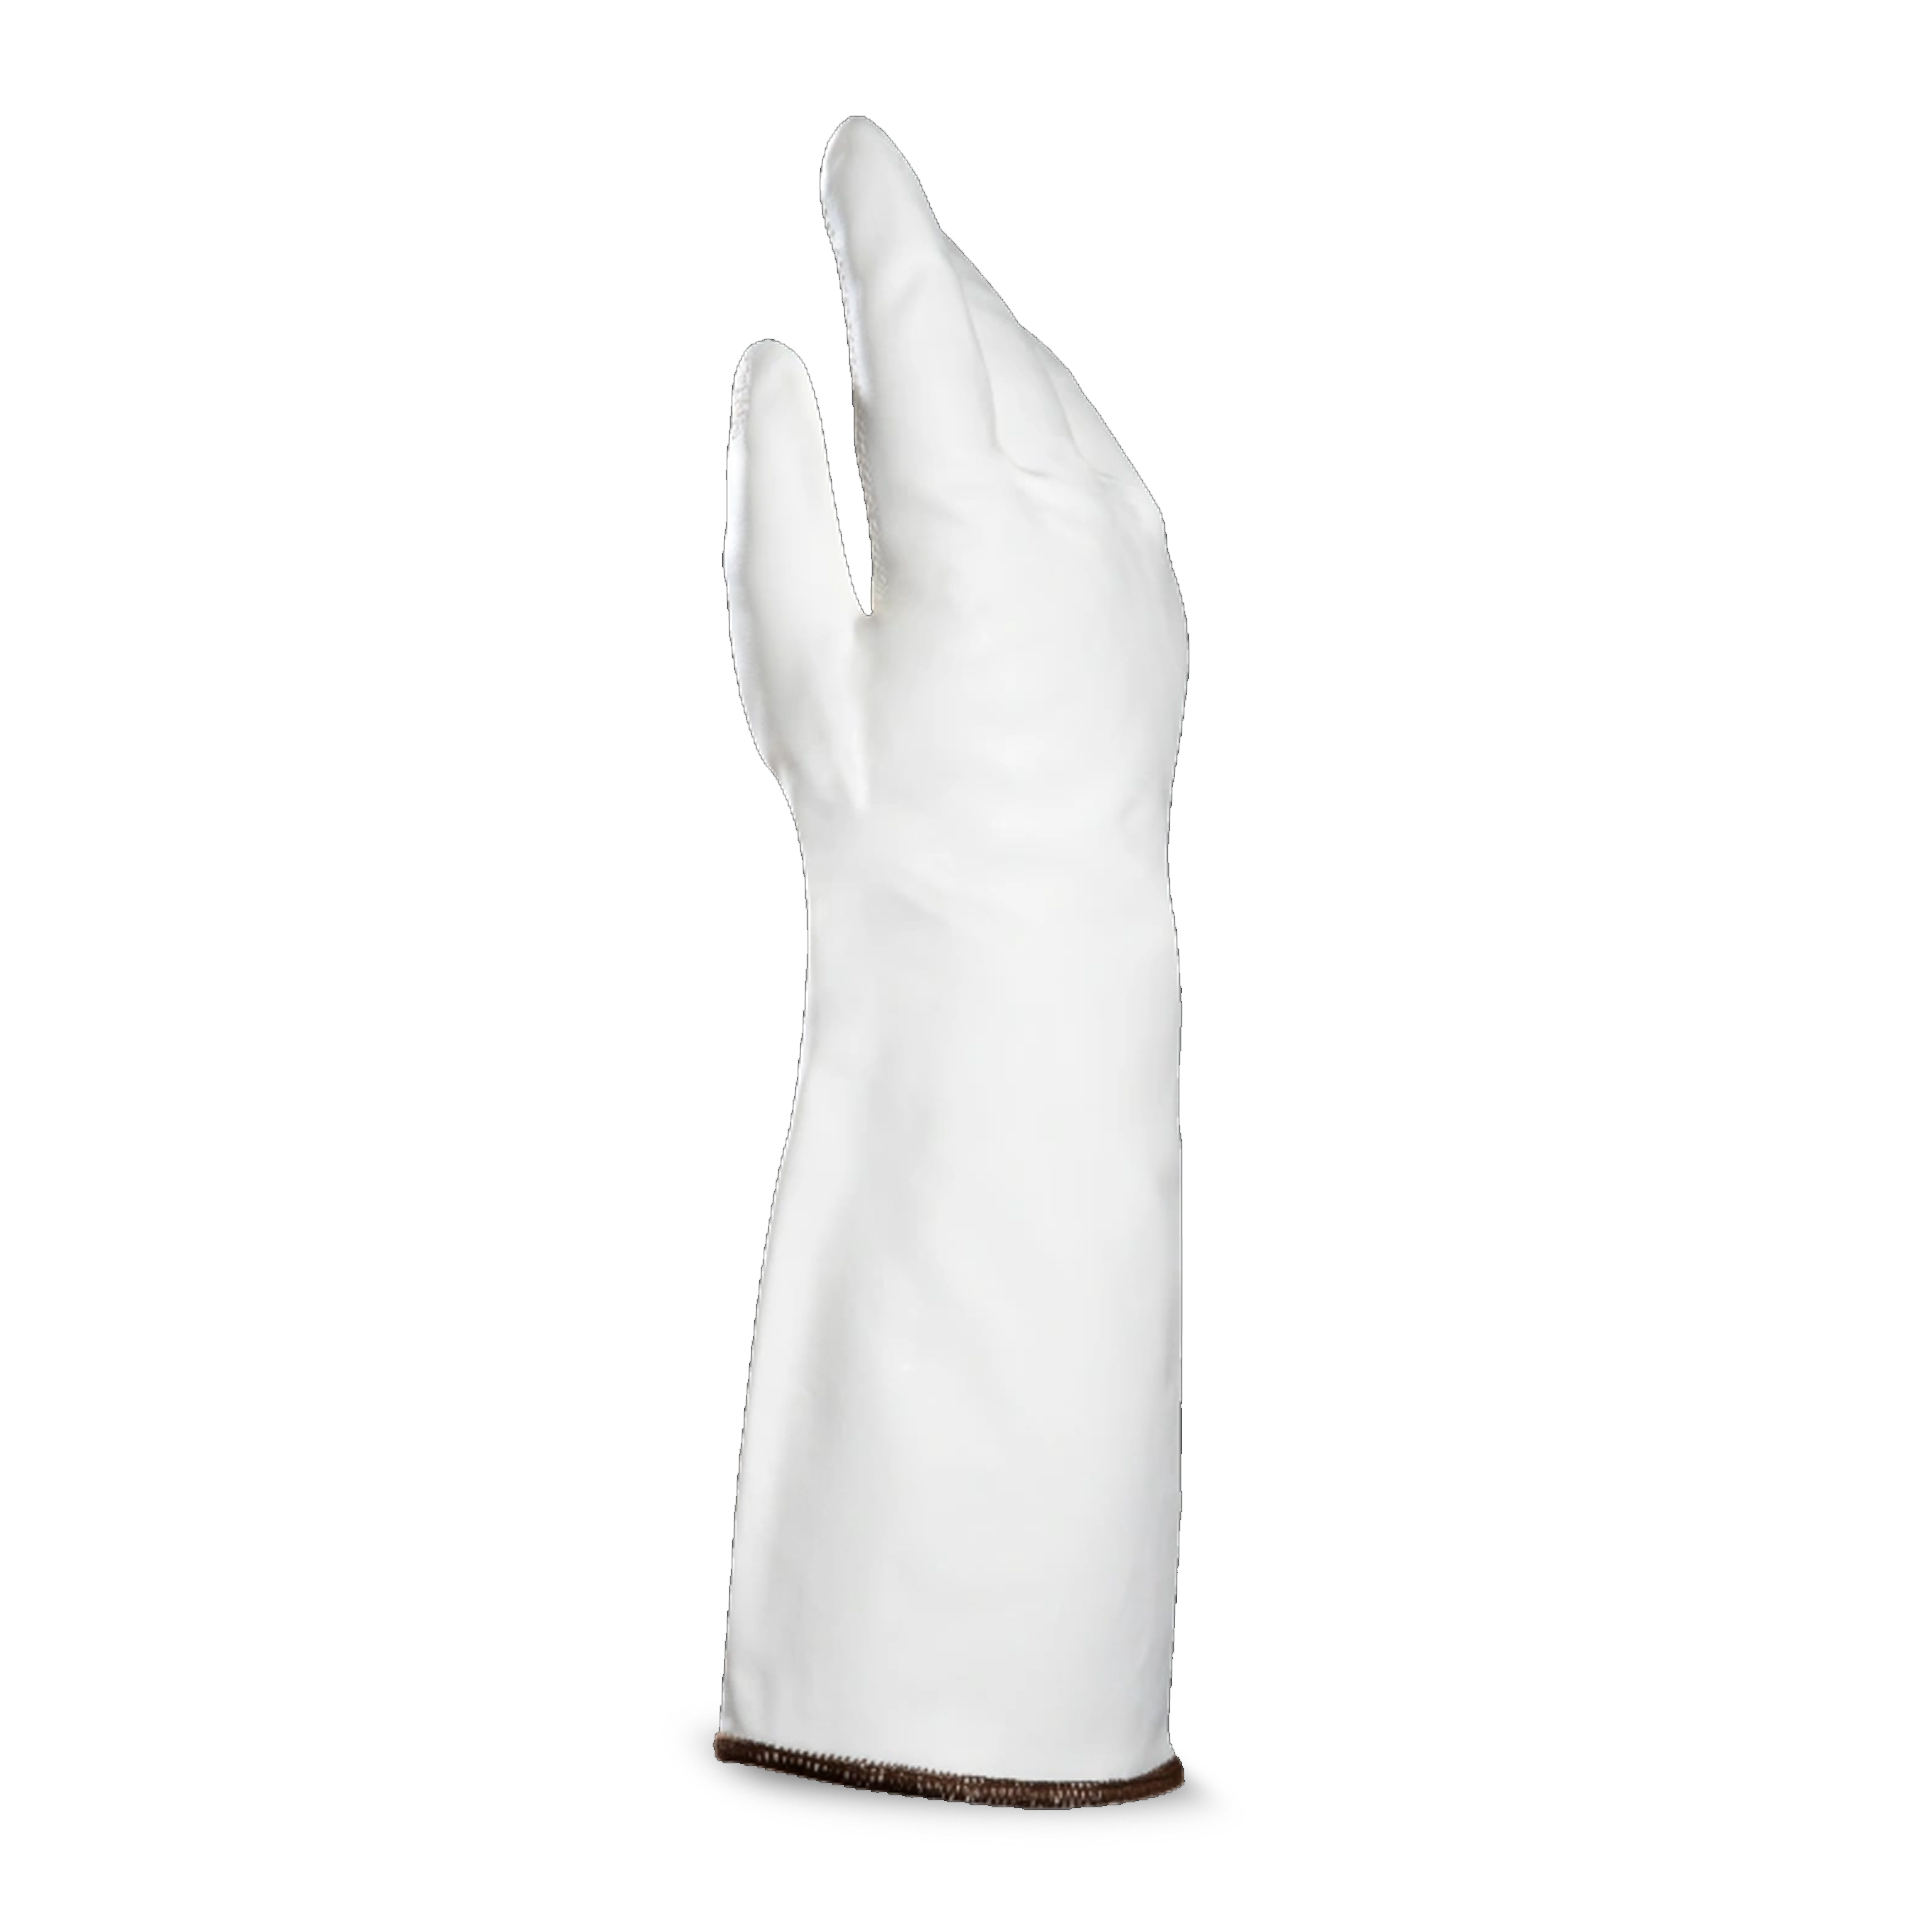 TEMP-COOK 476-THERMAL RESISTANT RANGE-SIZE 11 WHITE